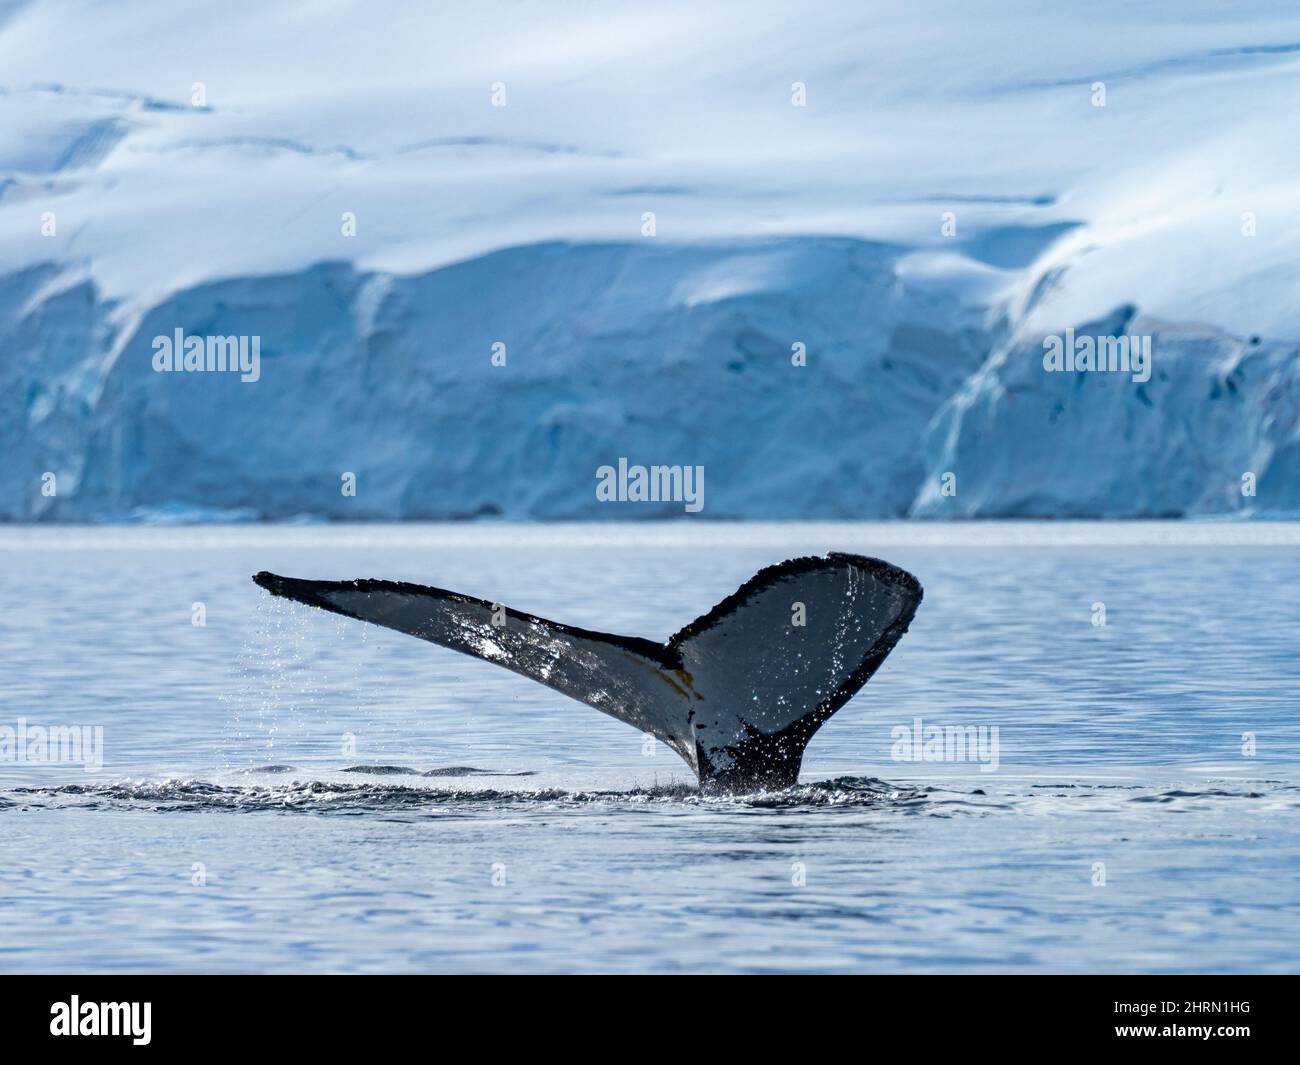 A Humpback whale, Megaptera novaeangliae in a sheltered bay with glaciers along the peninsula of Antarctica Stock Photo